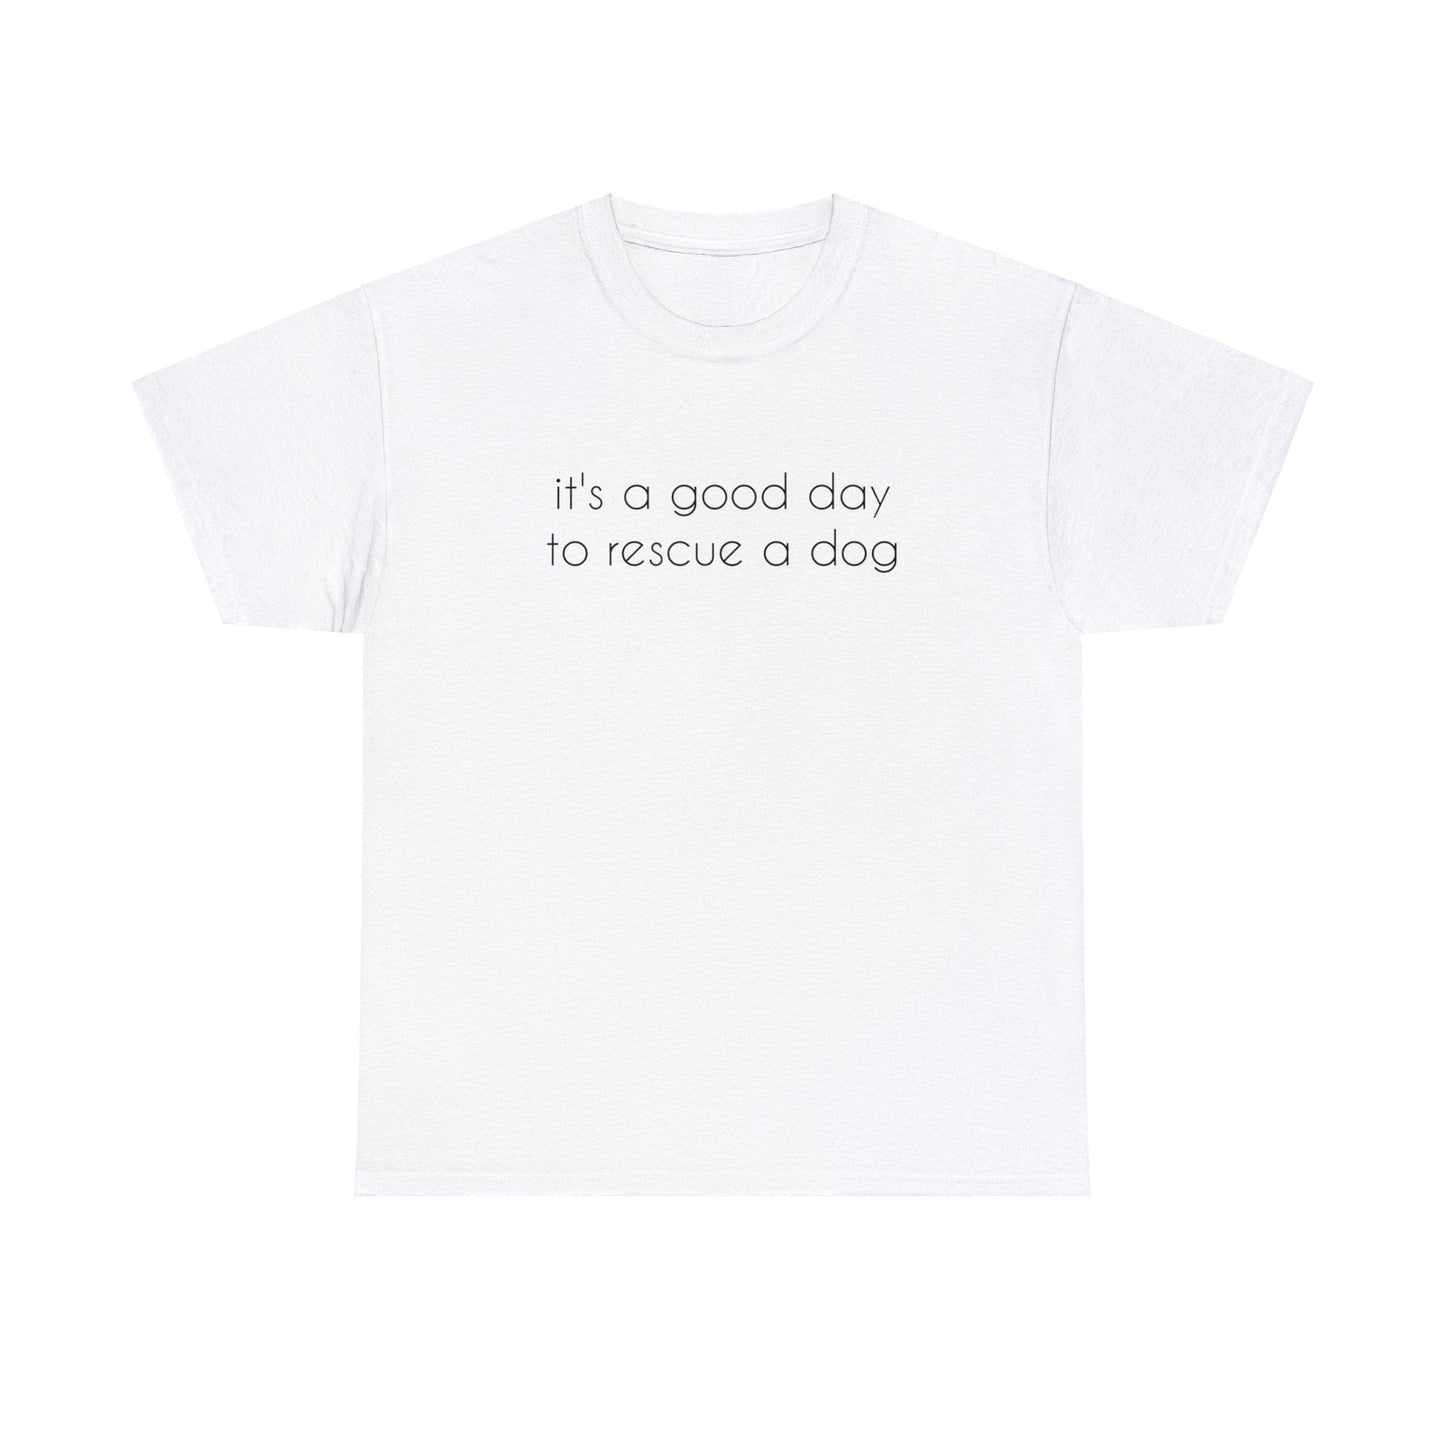 It's A Good Day To Rescue A Dog | Text Tees - Detezi Designs-73163557627855500402